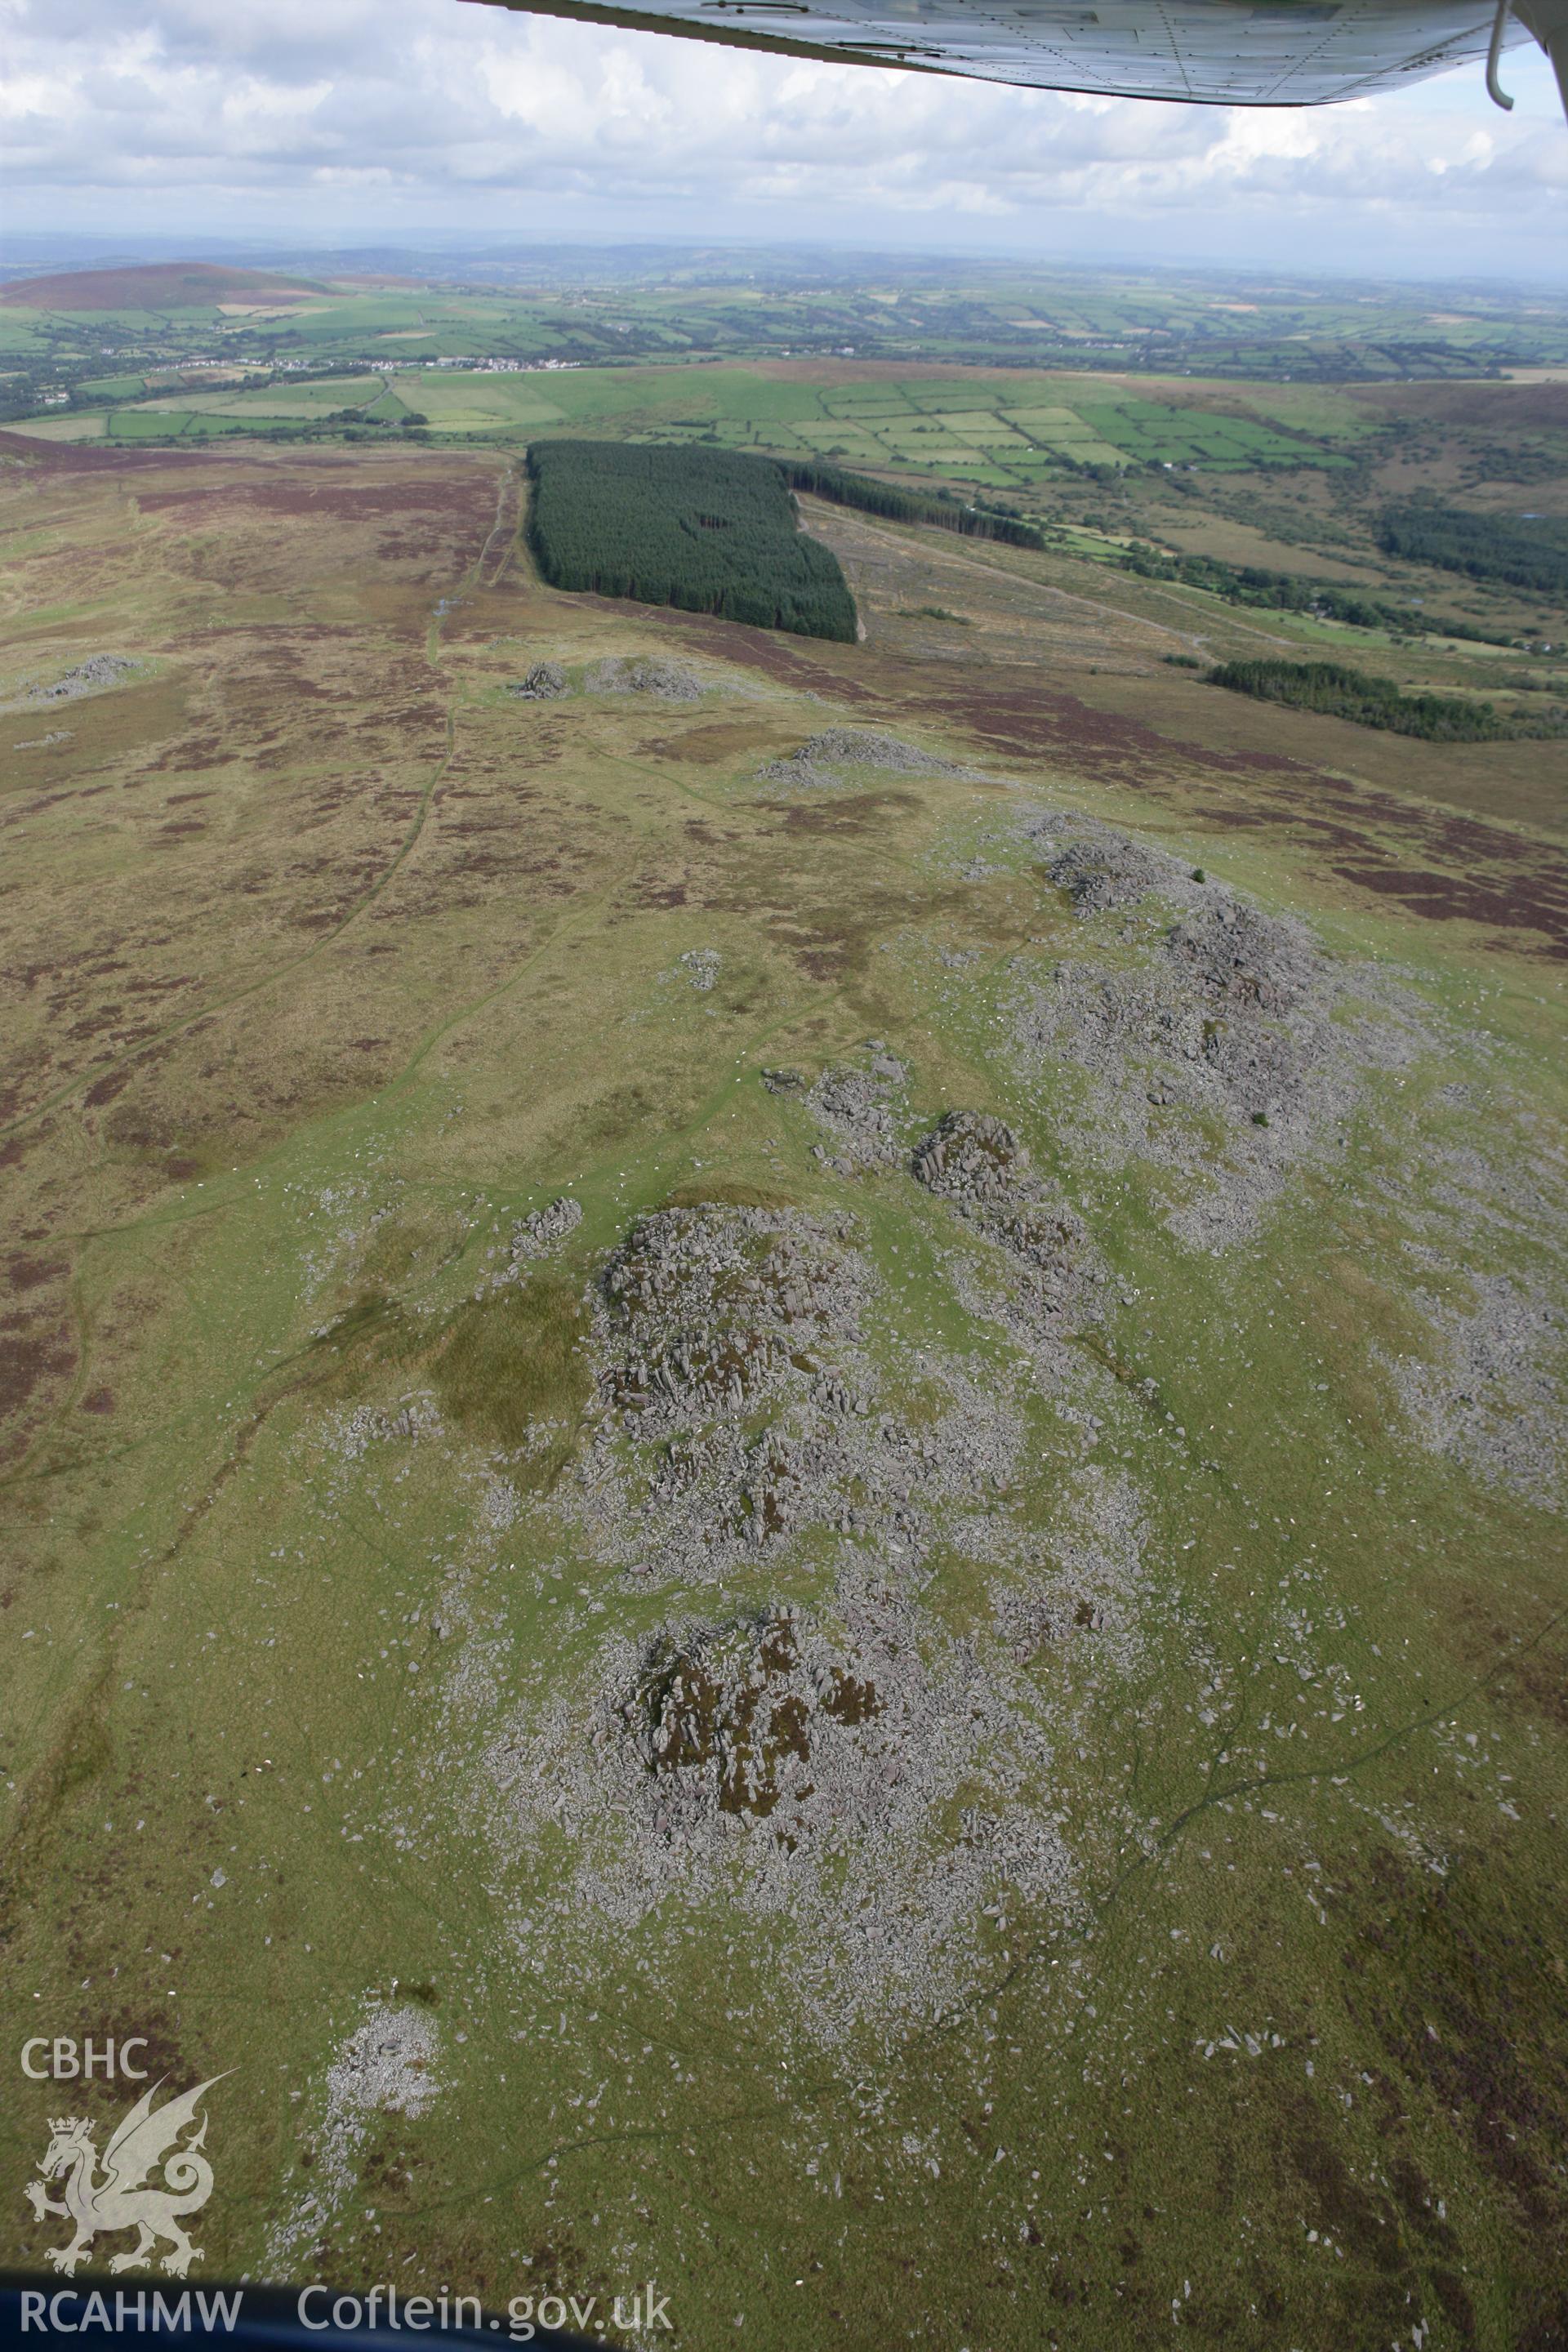 RCAHMW colour oblique photograph of Carn Menyn Cairn. Taken by Toby Driver on 09/09/2010.